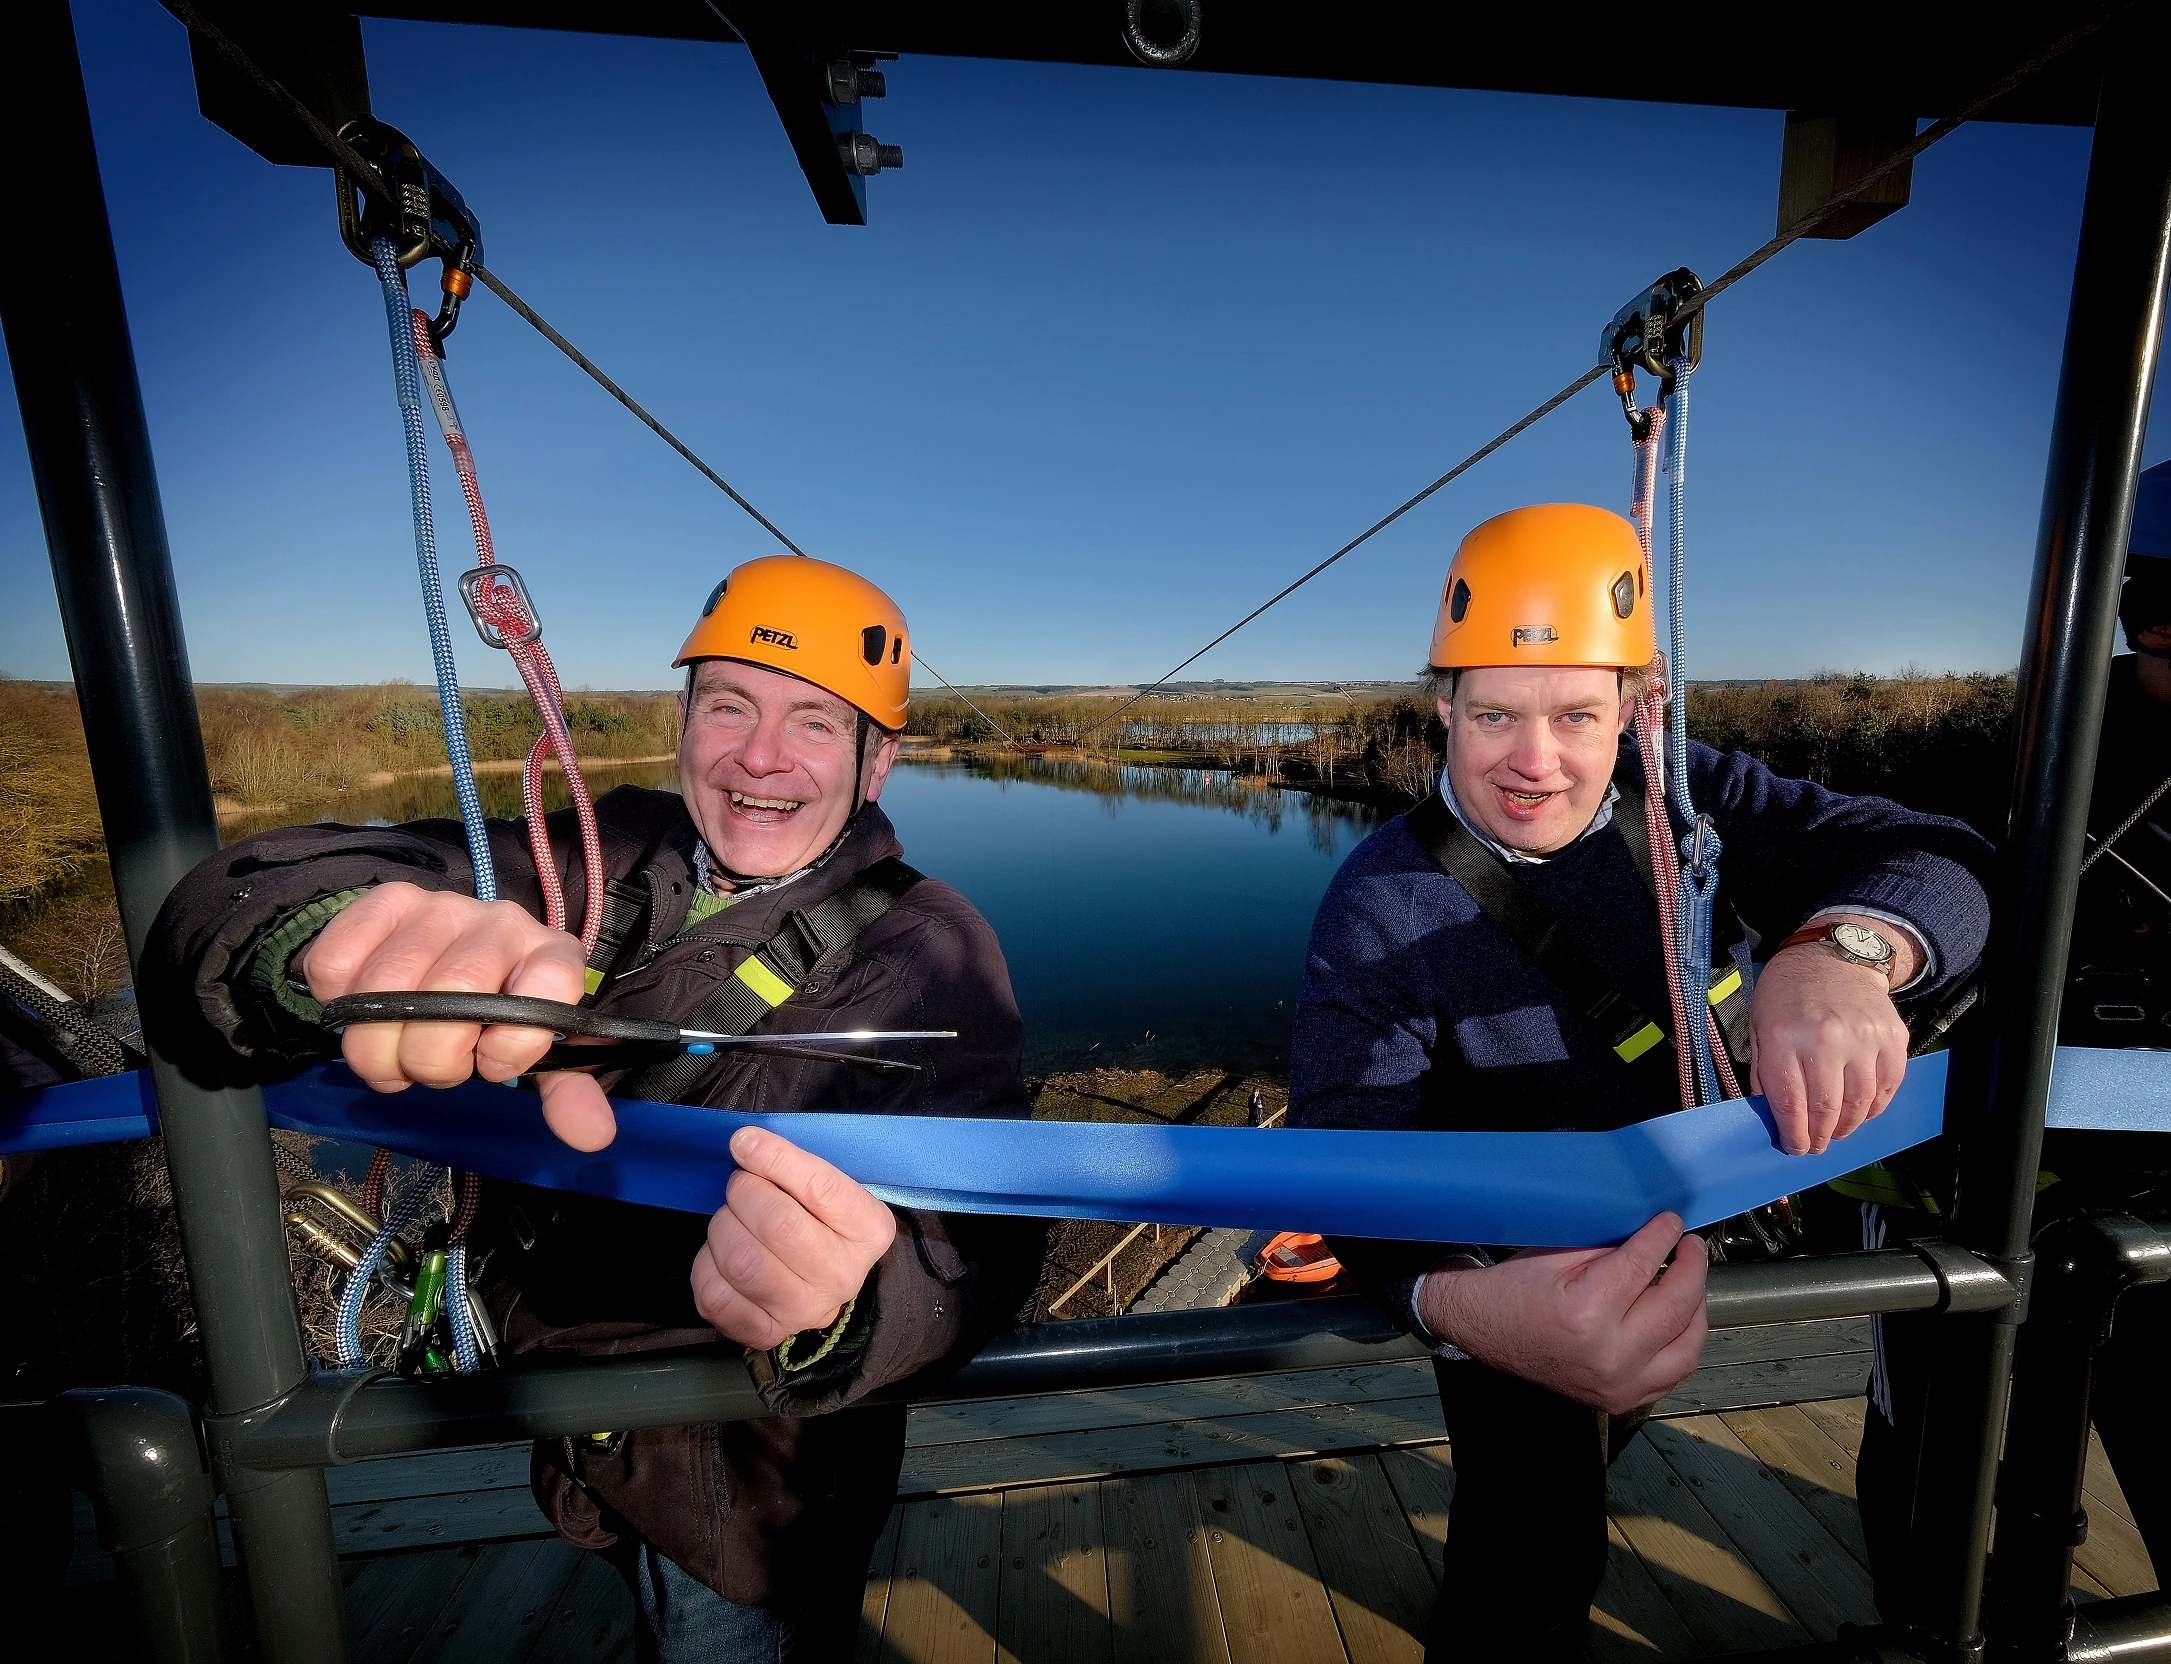 Sir Robert Good Will (left) and Lord Downe of Dawnay Estates (right) officially opening the new zip line at North Yorkshire Water Park.